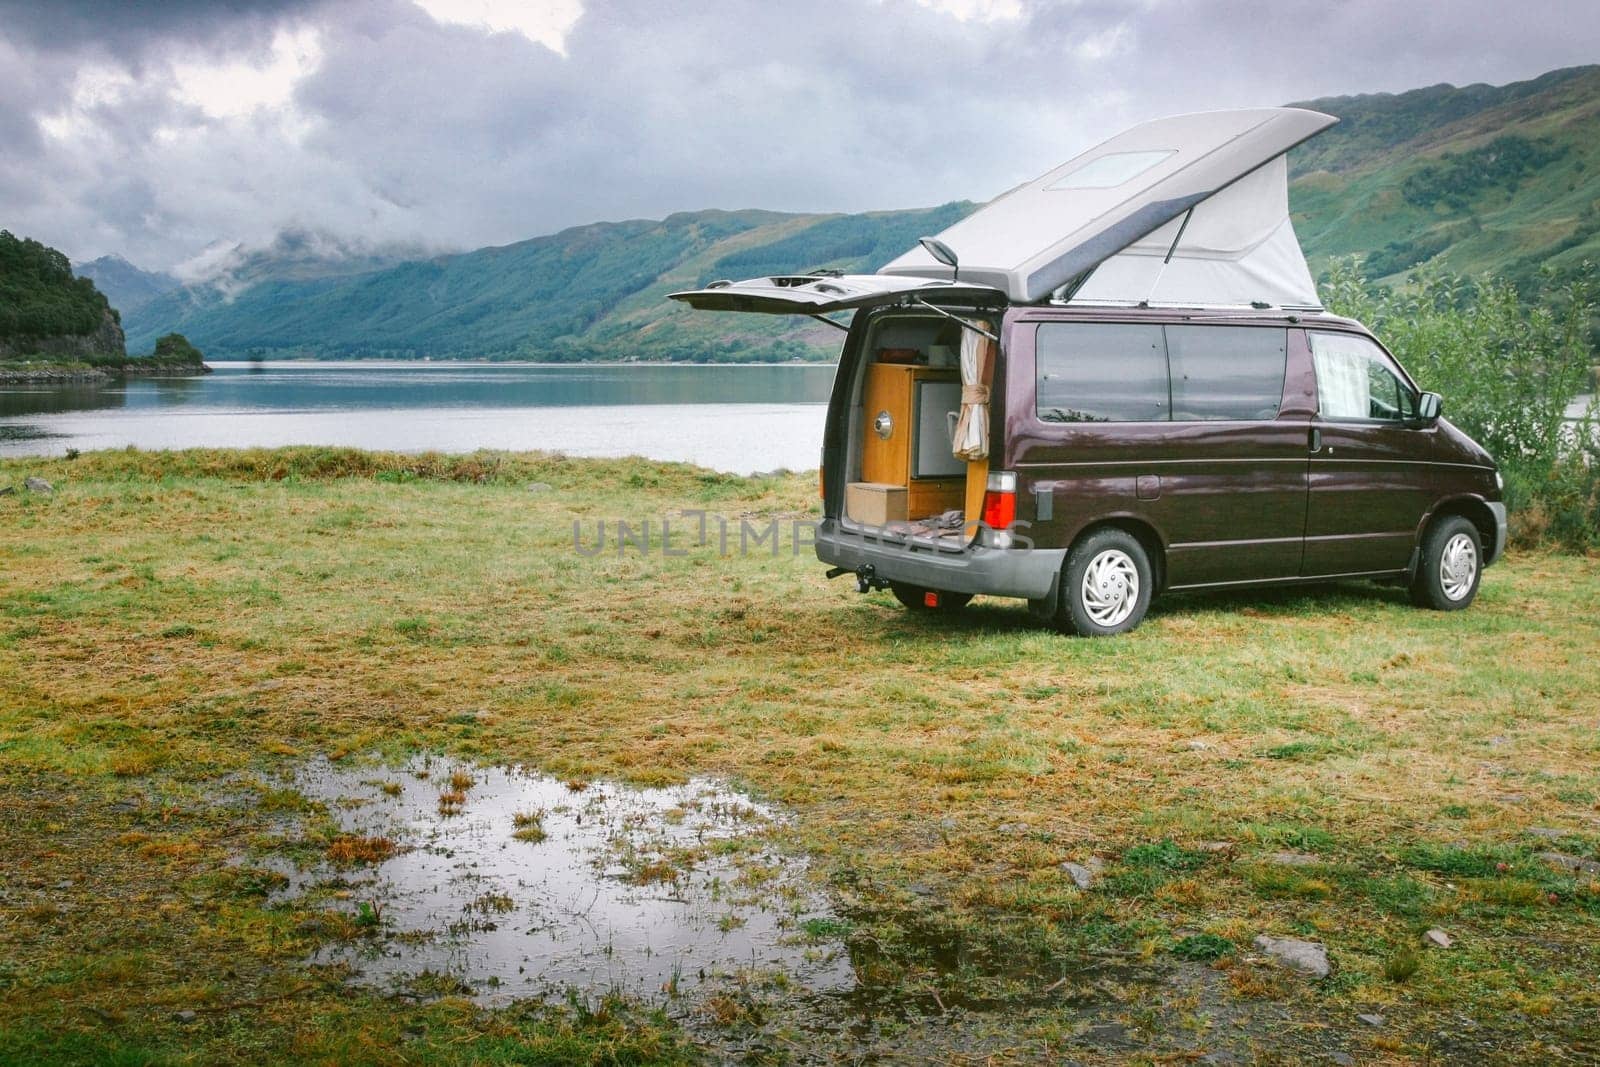 A brown campervan is parked in a grassy field next to a lake. The van has an open roof and the sky is cloudy. The scene has a calm and serene atmosphere, with the lake. Road trip concept.